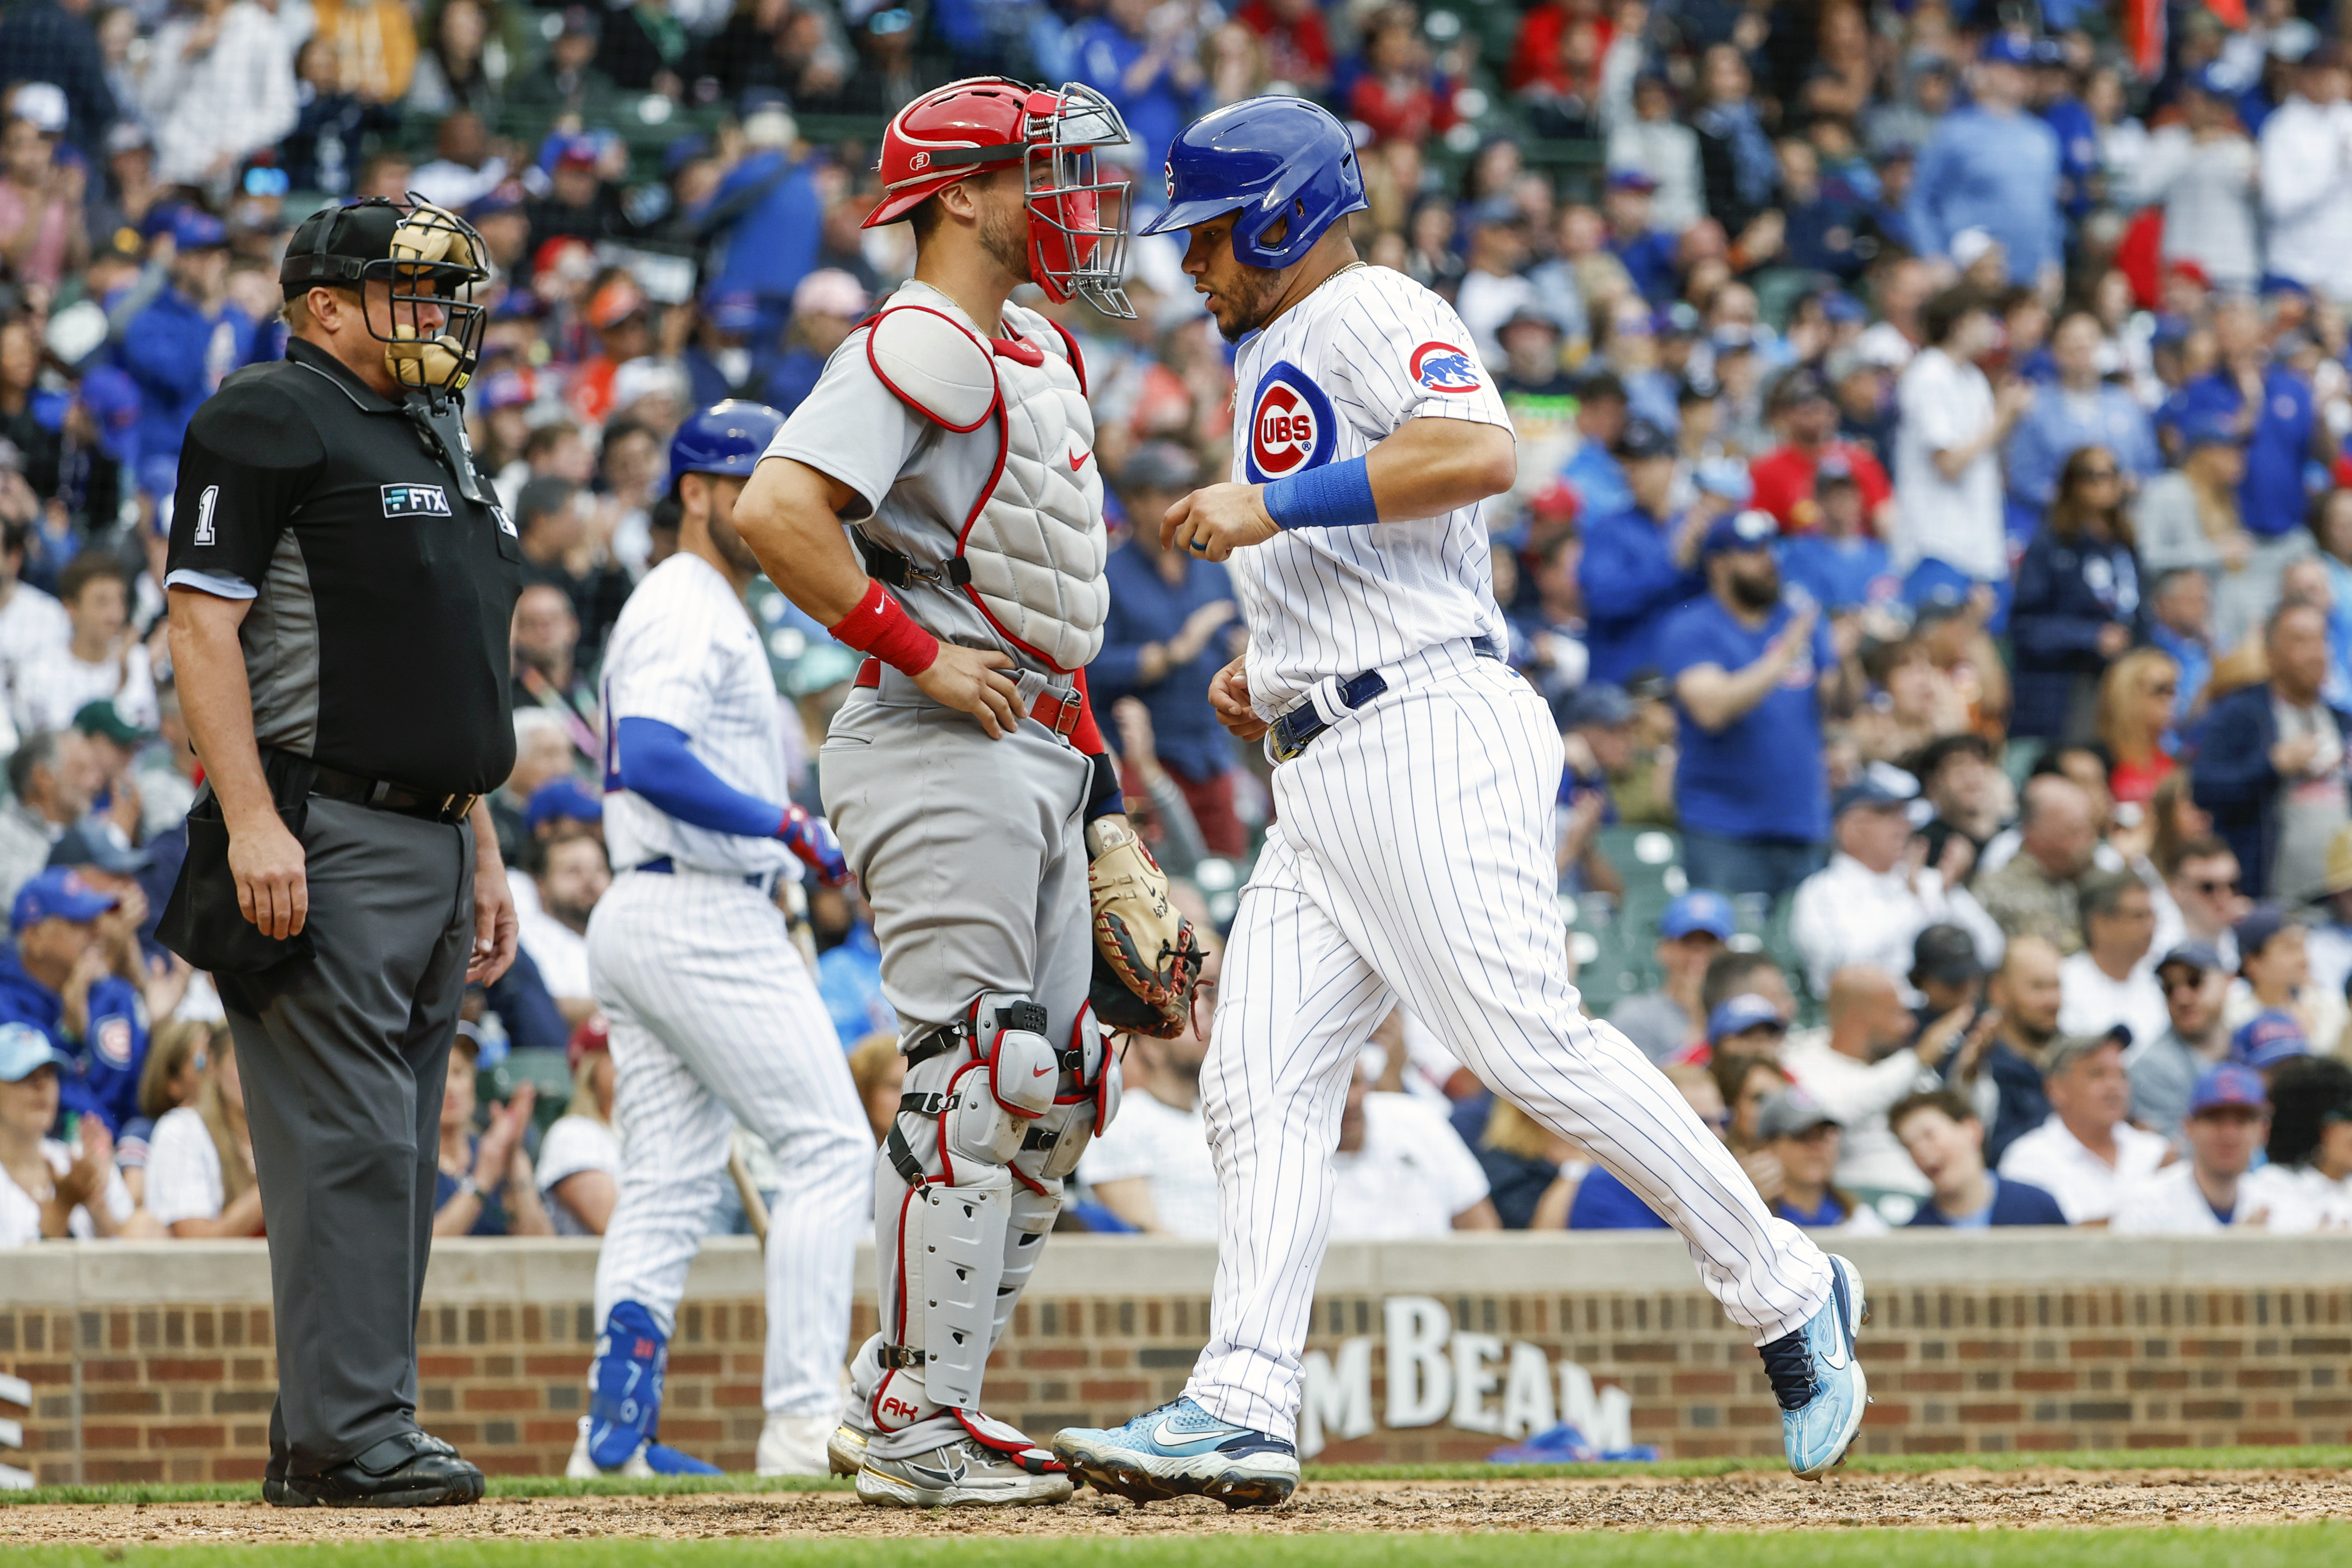 What happened to Willson Contreras? Cardinals catcher removed from